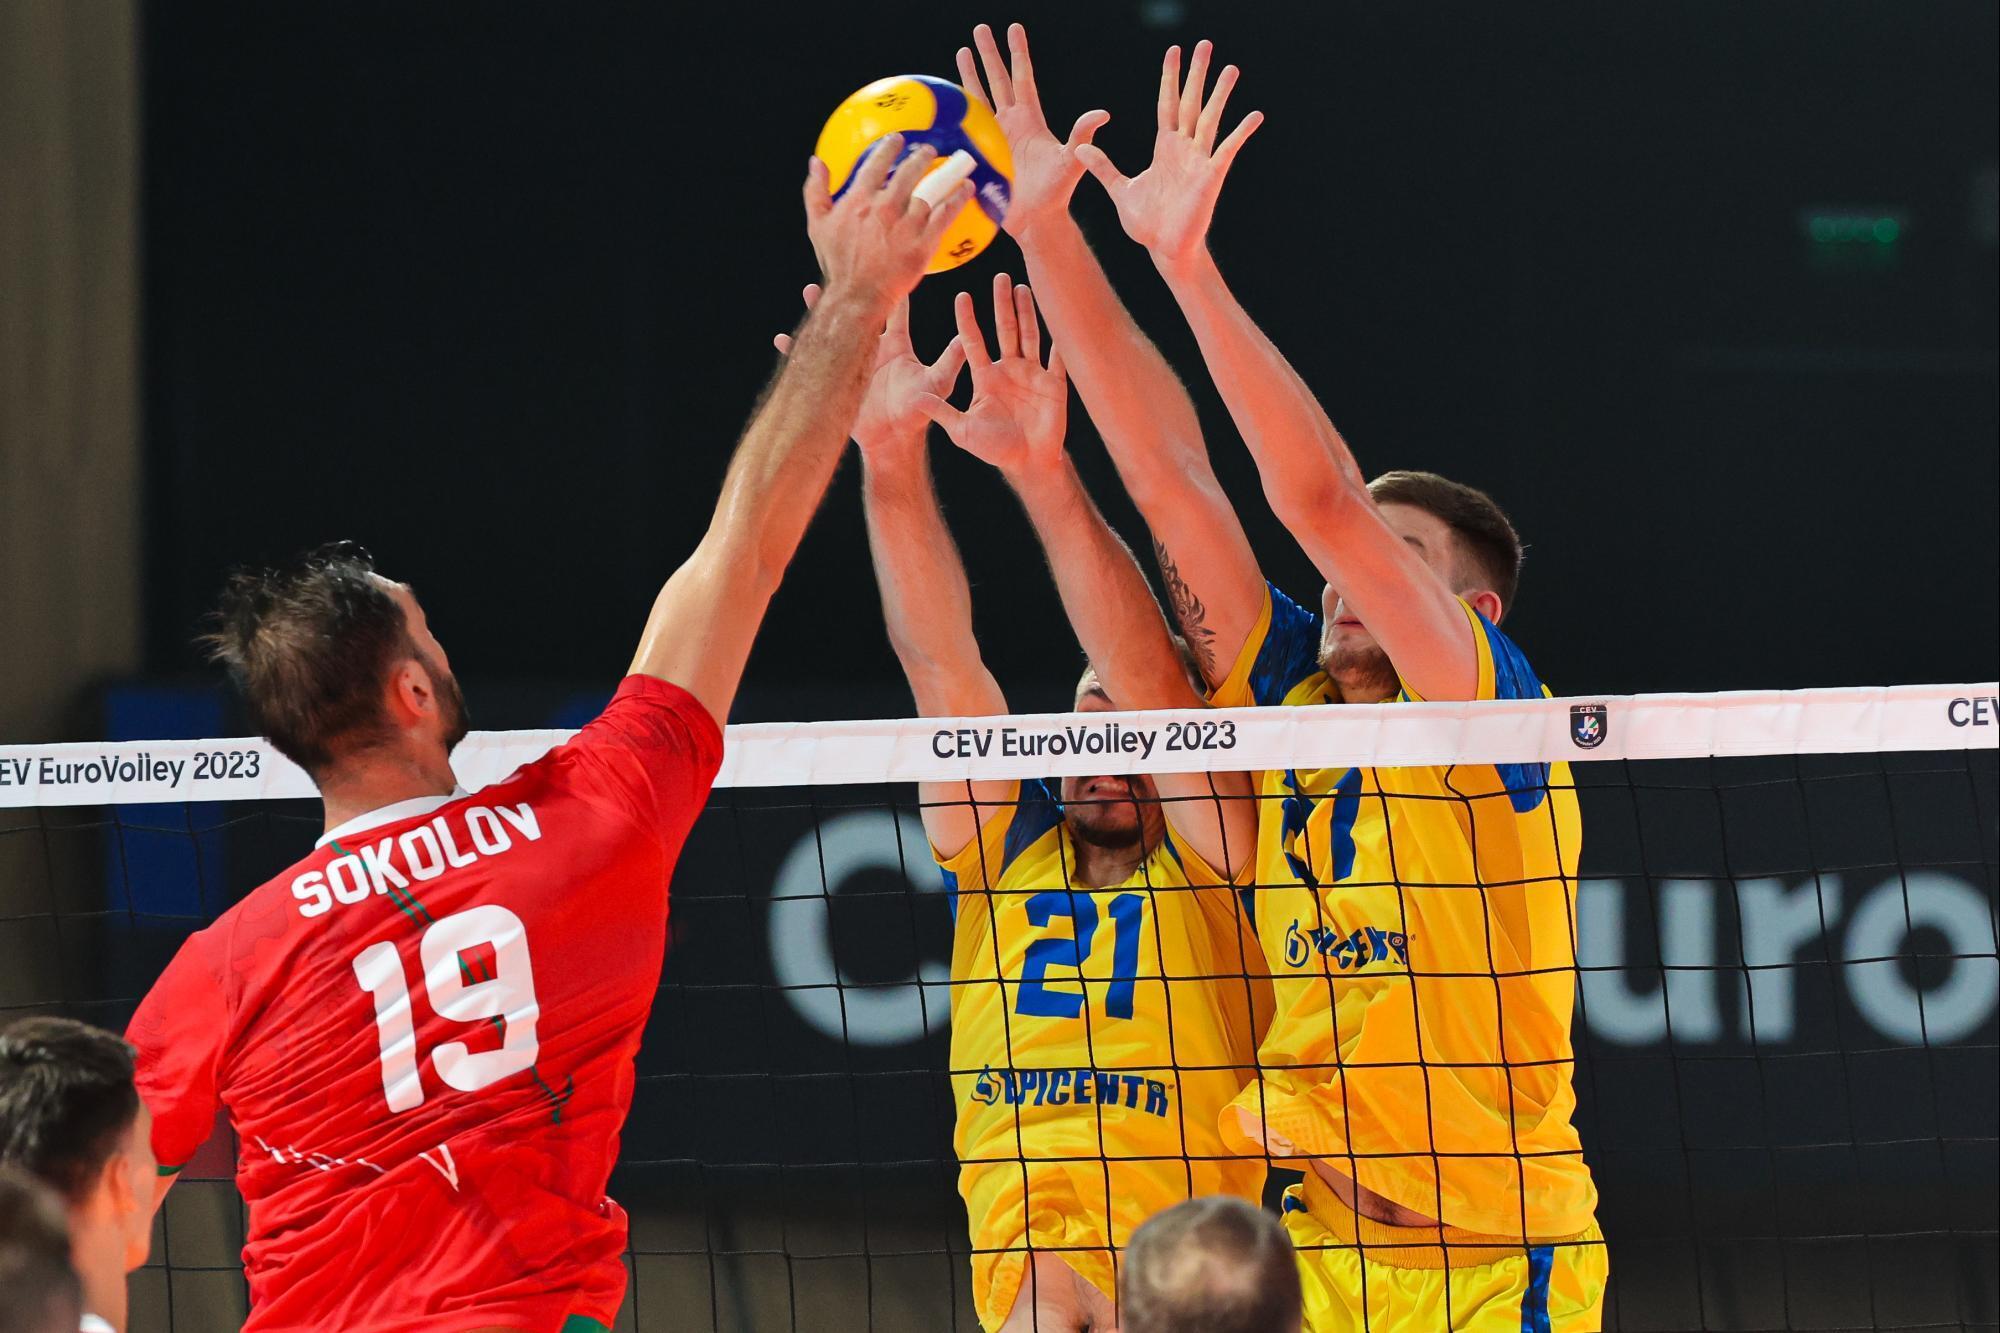 Ukraine suffers third consecutive defeat at European Volleyball Championship